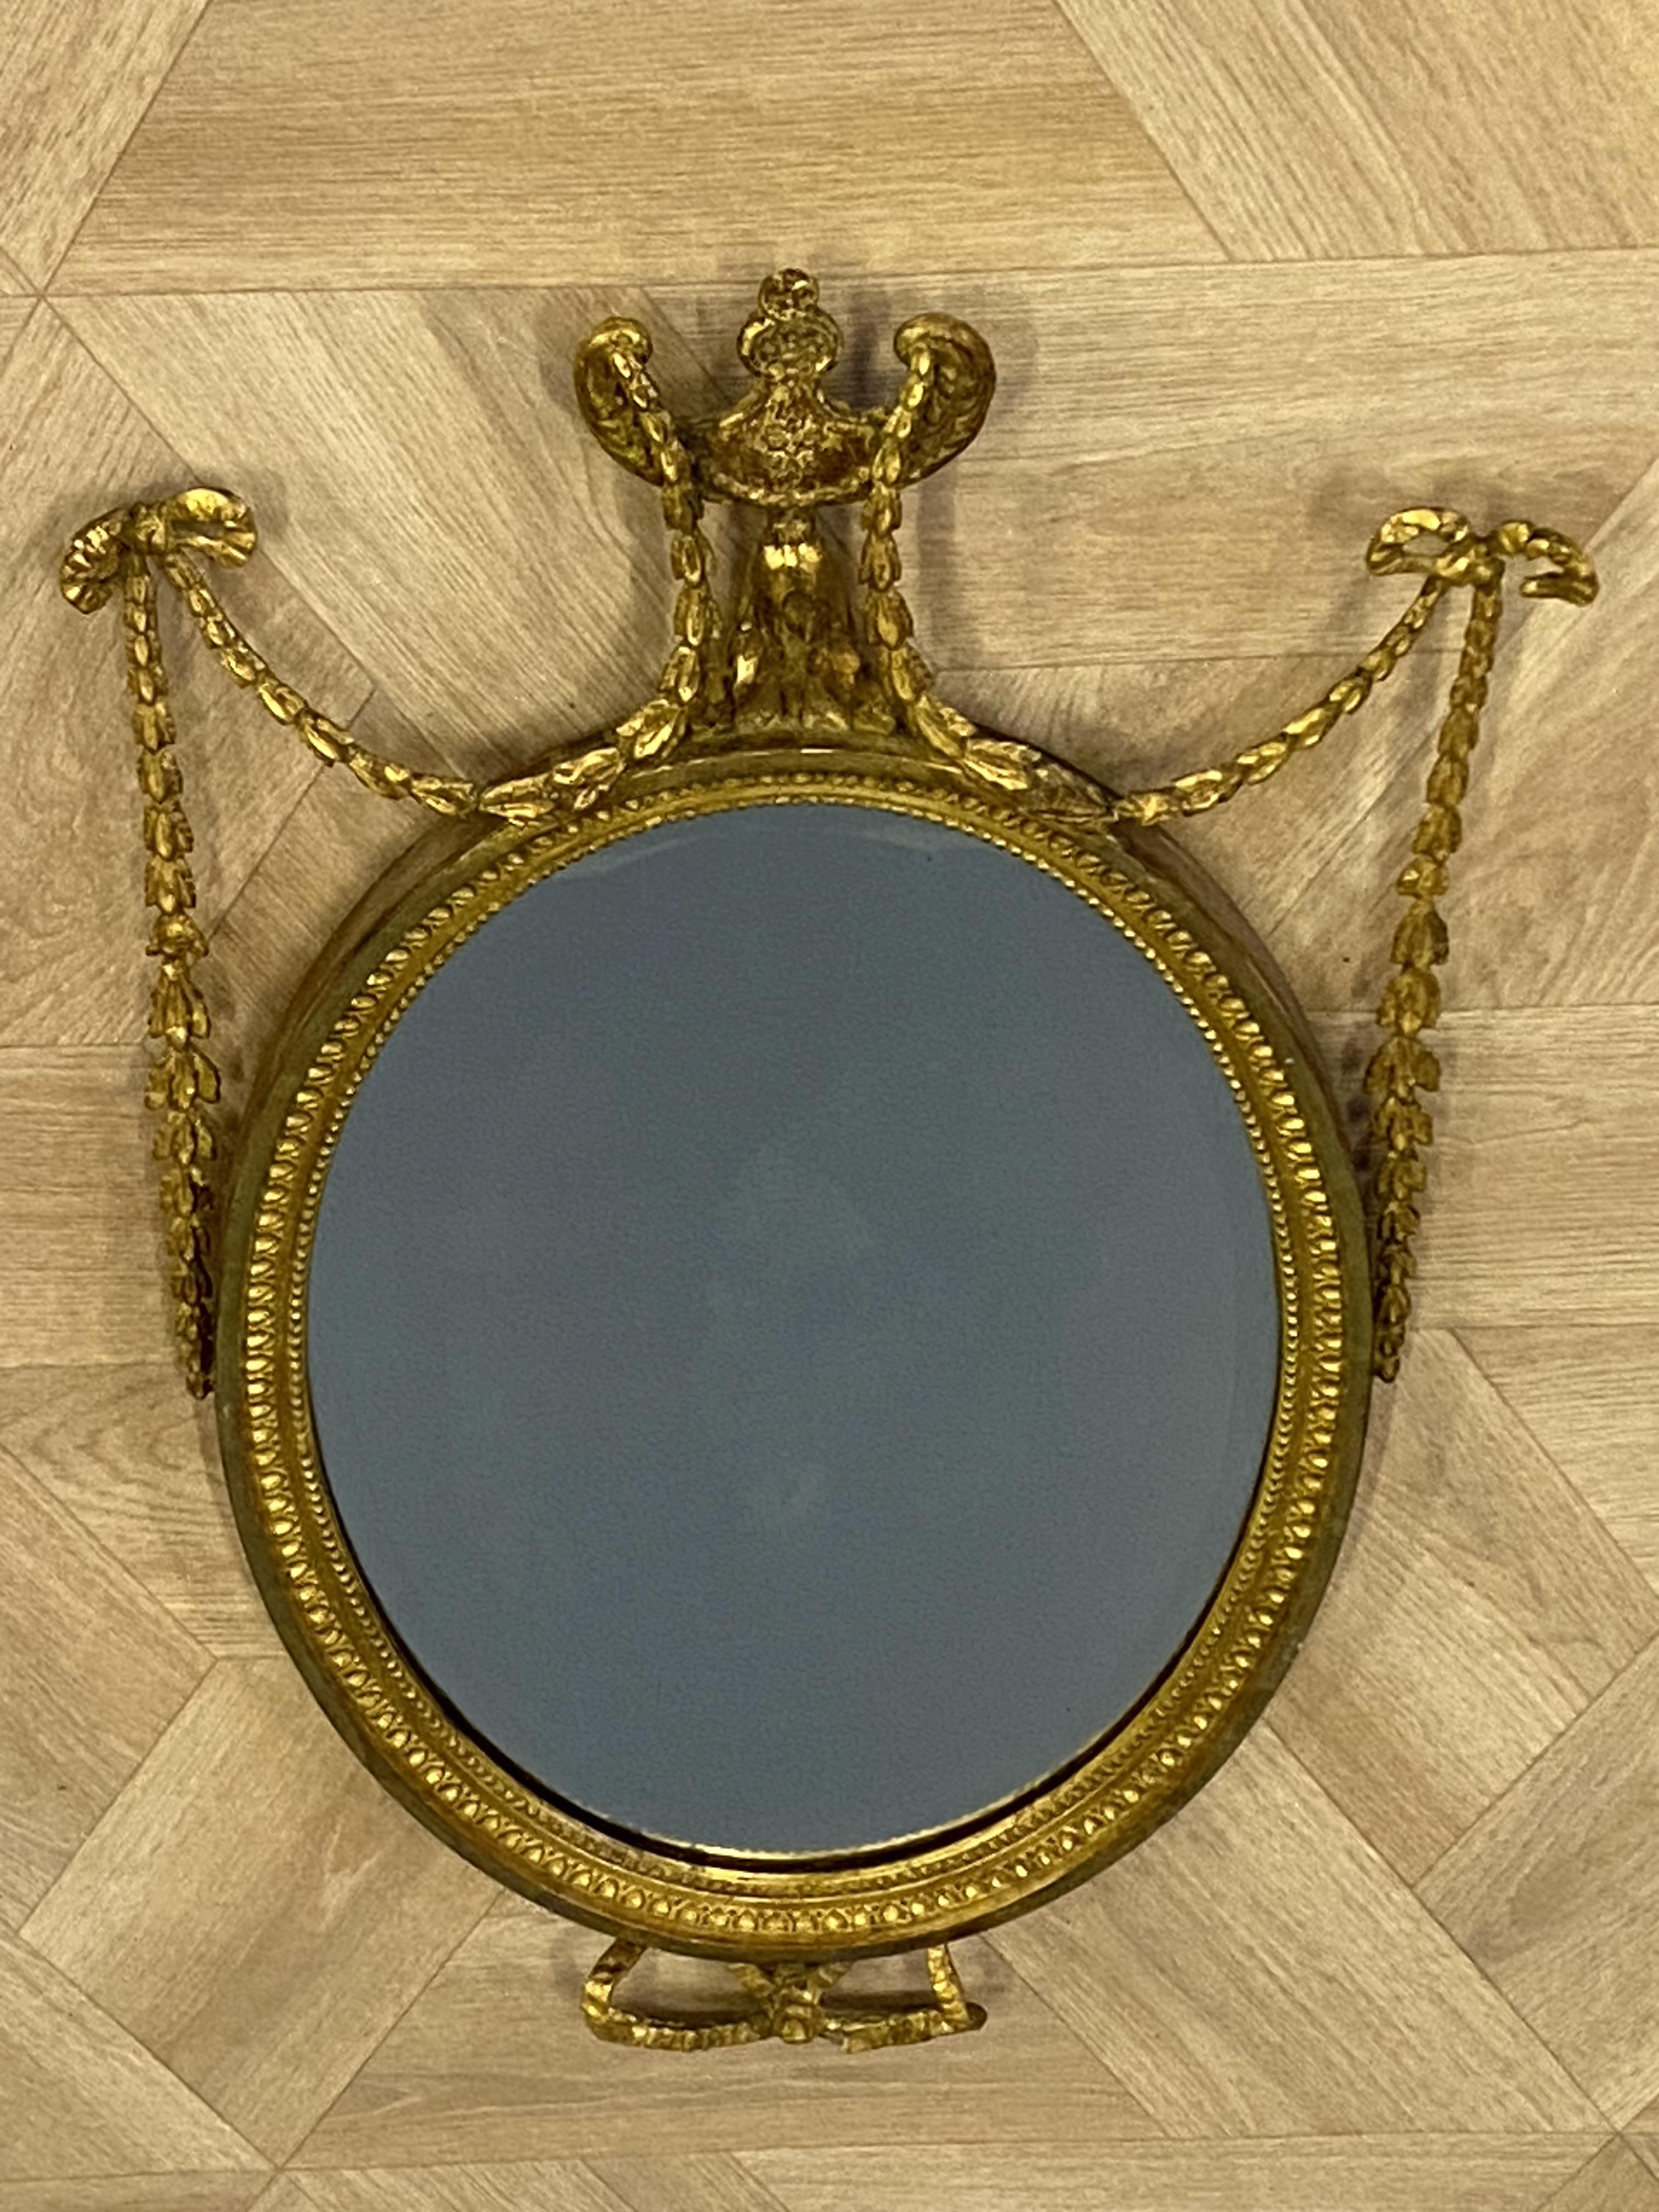 Antique oval Adam style mirror - Image 3 of 5